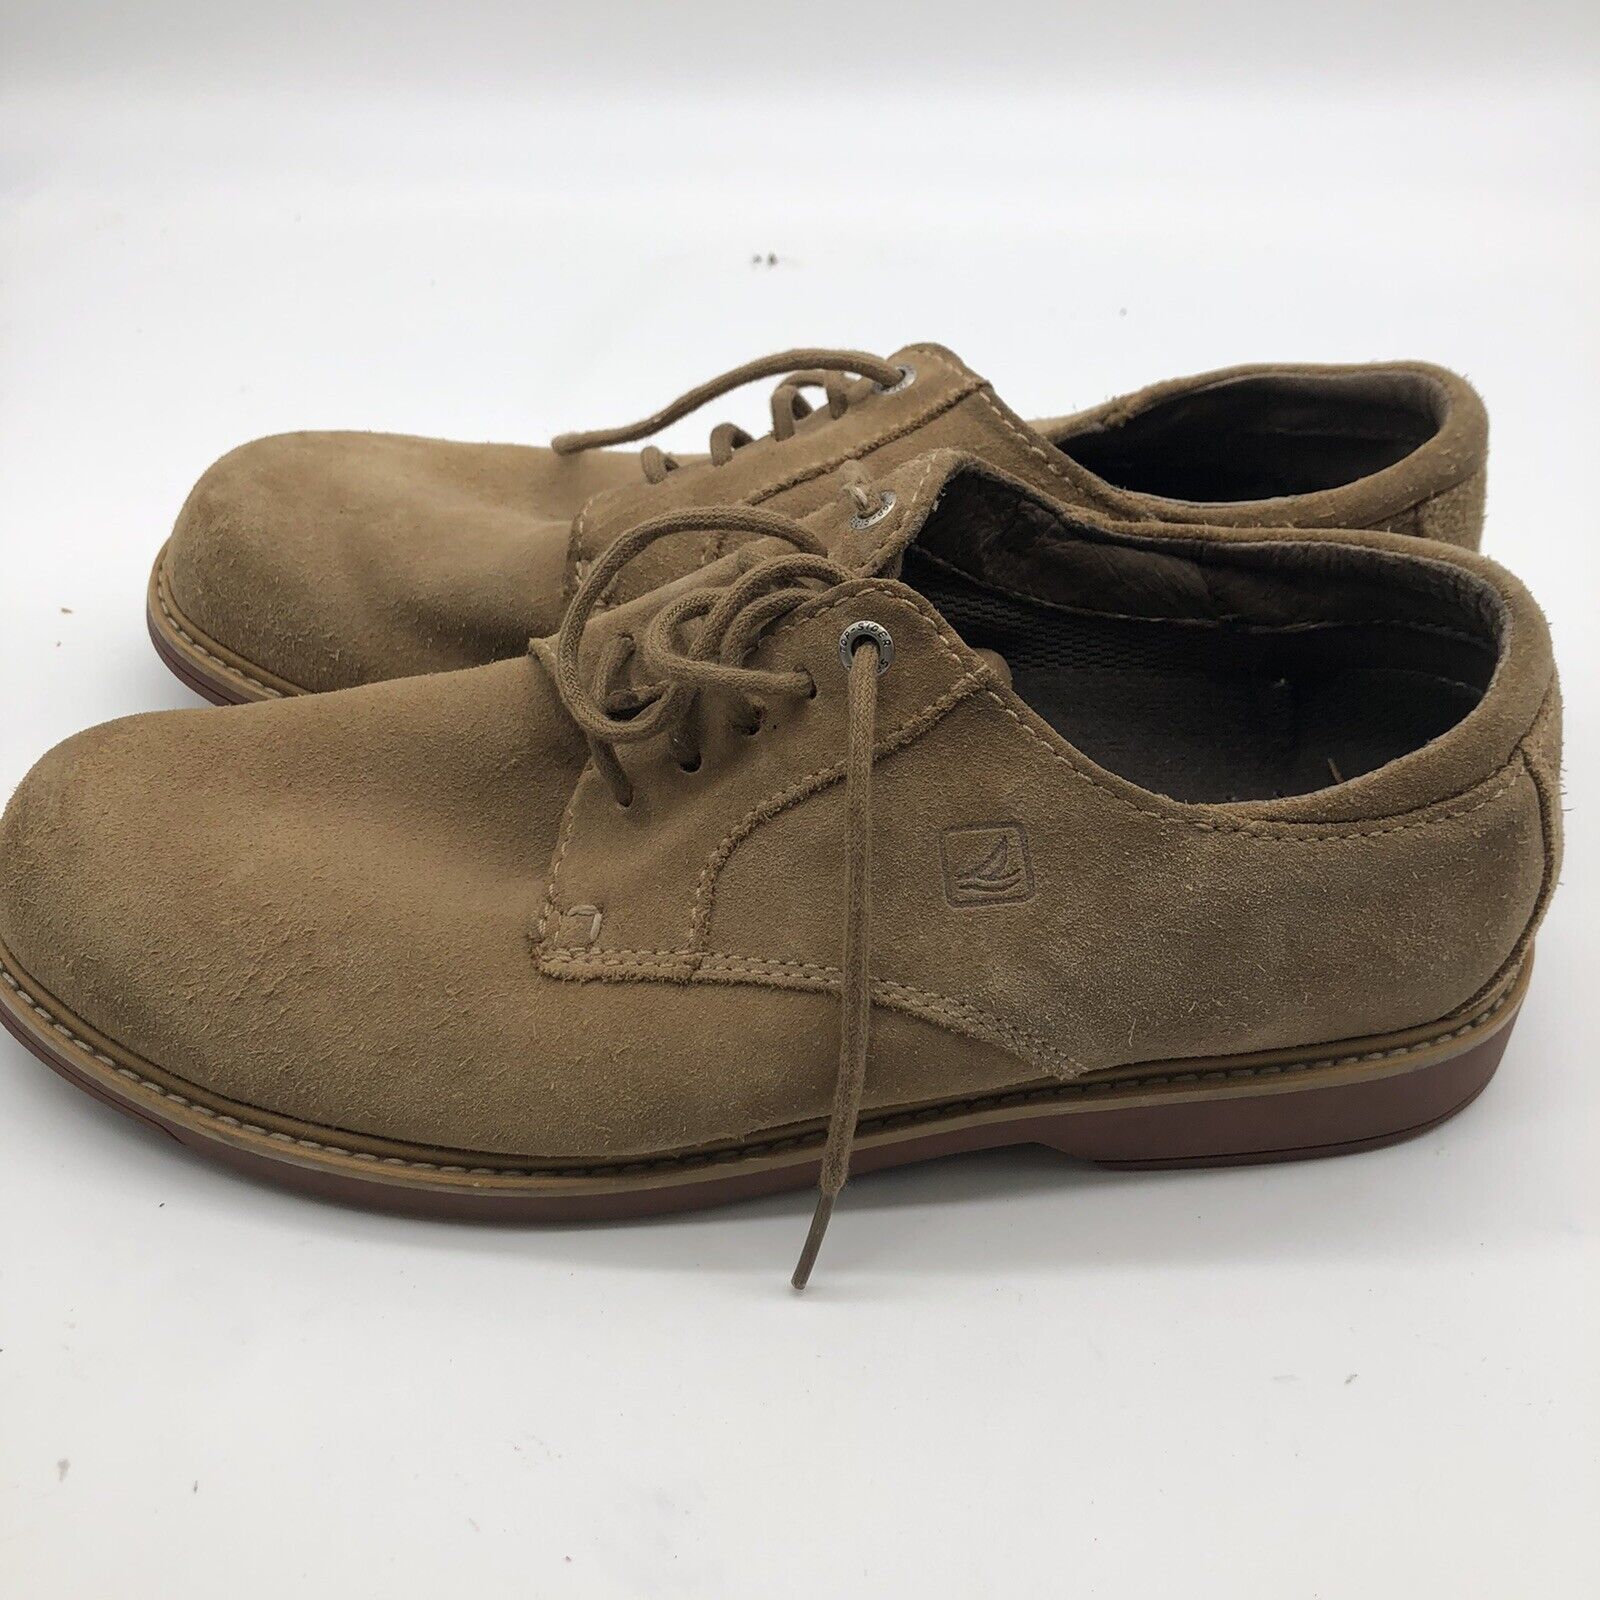 Primary image for Sperry Top-Sider Men’s Size 11.5 Lace Up Leather Casual Shoe Tan/Brown 0664771